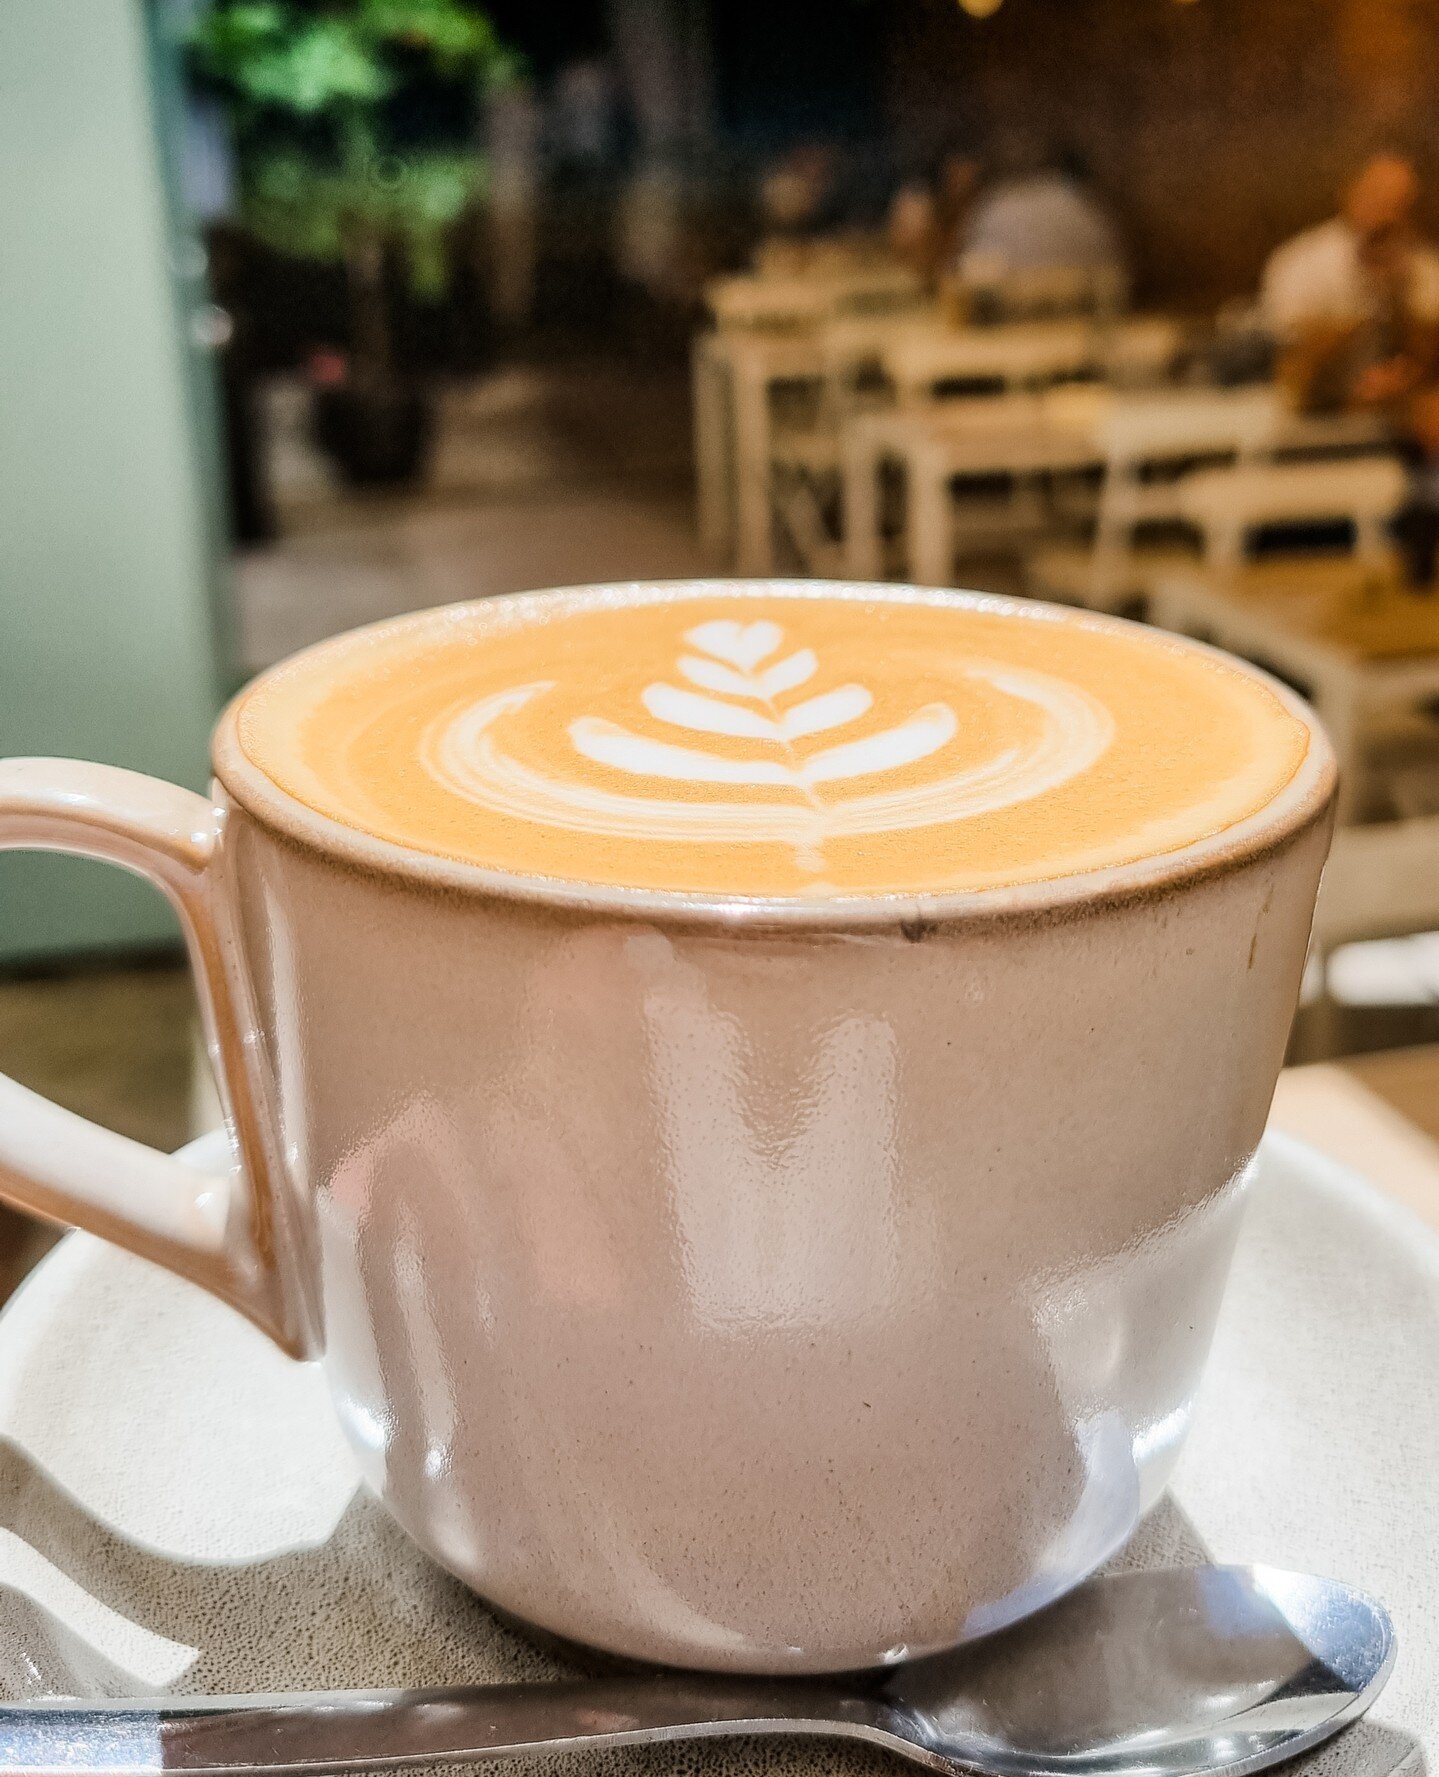 My Perfect Monday Morning = Happiness with a touch of coffee satisfaction!  Thank you @frankie_andgeorge⁠
.⁠
.⁠
.⁠
.⁠
.⁠
.⁠
.⁠
.⁠
.⁠
.⁠
.⁠
⁠
#mondaybliss #coffeecoffeecoffee #brisbanecoffeescene #frankieandgeorge #fng #brisbanecoffee #bestcoffeebrisb